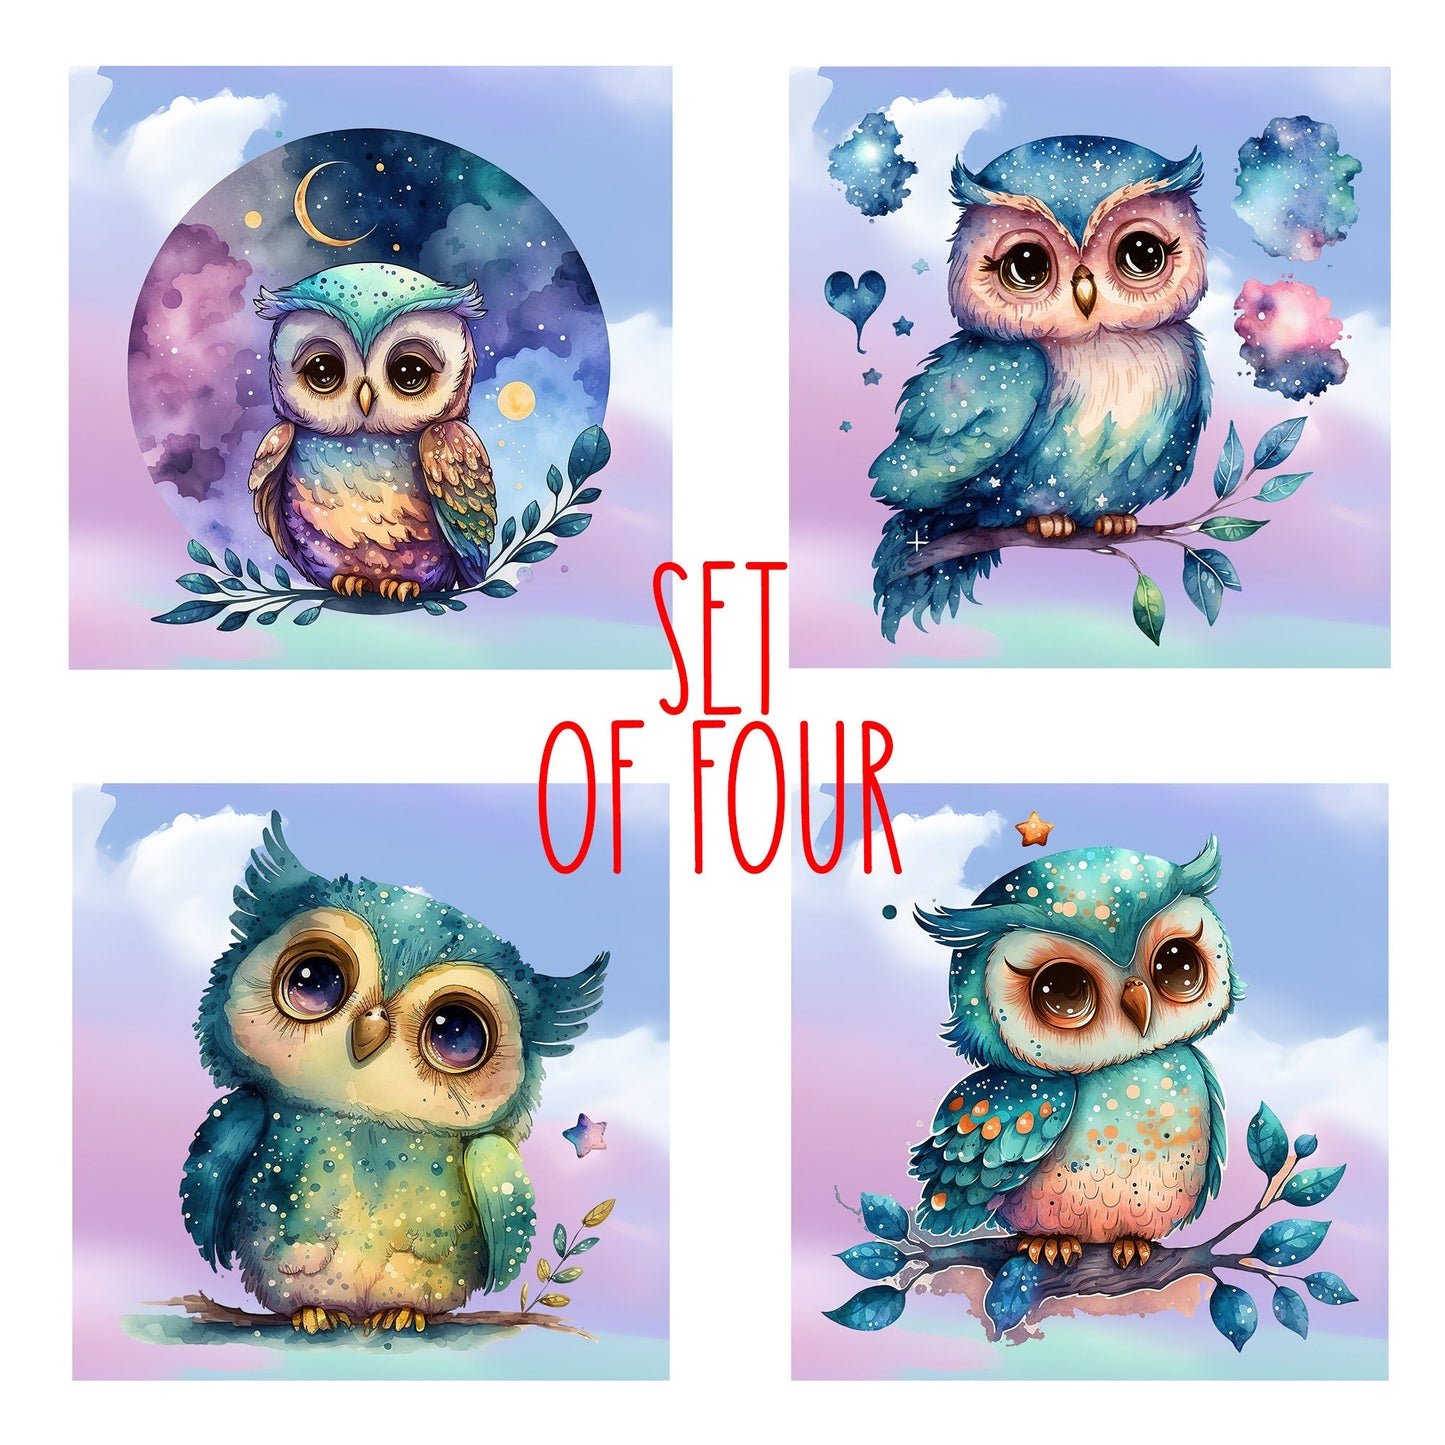 Cute Cartoon Owl Decorative Ceramic Tile Set with Optional Easel Back - Available in 4 sizes - Set of 4